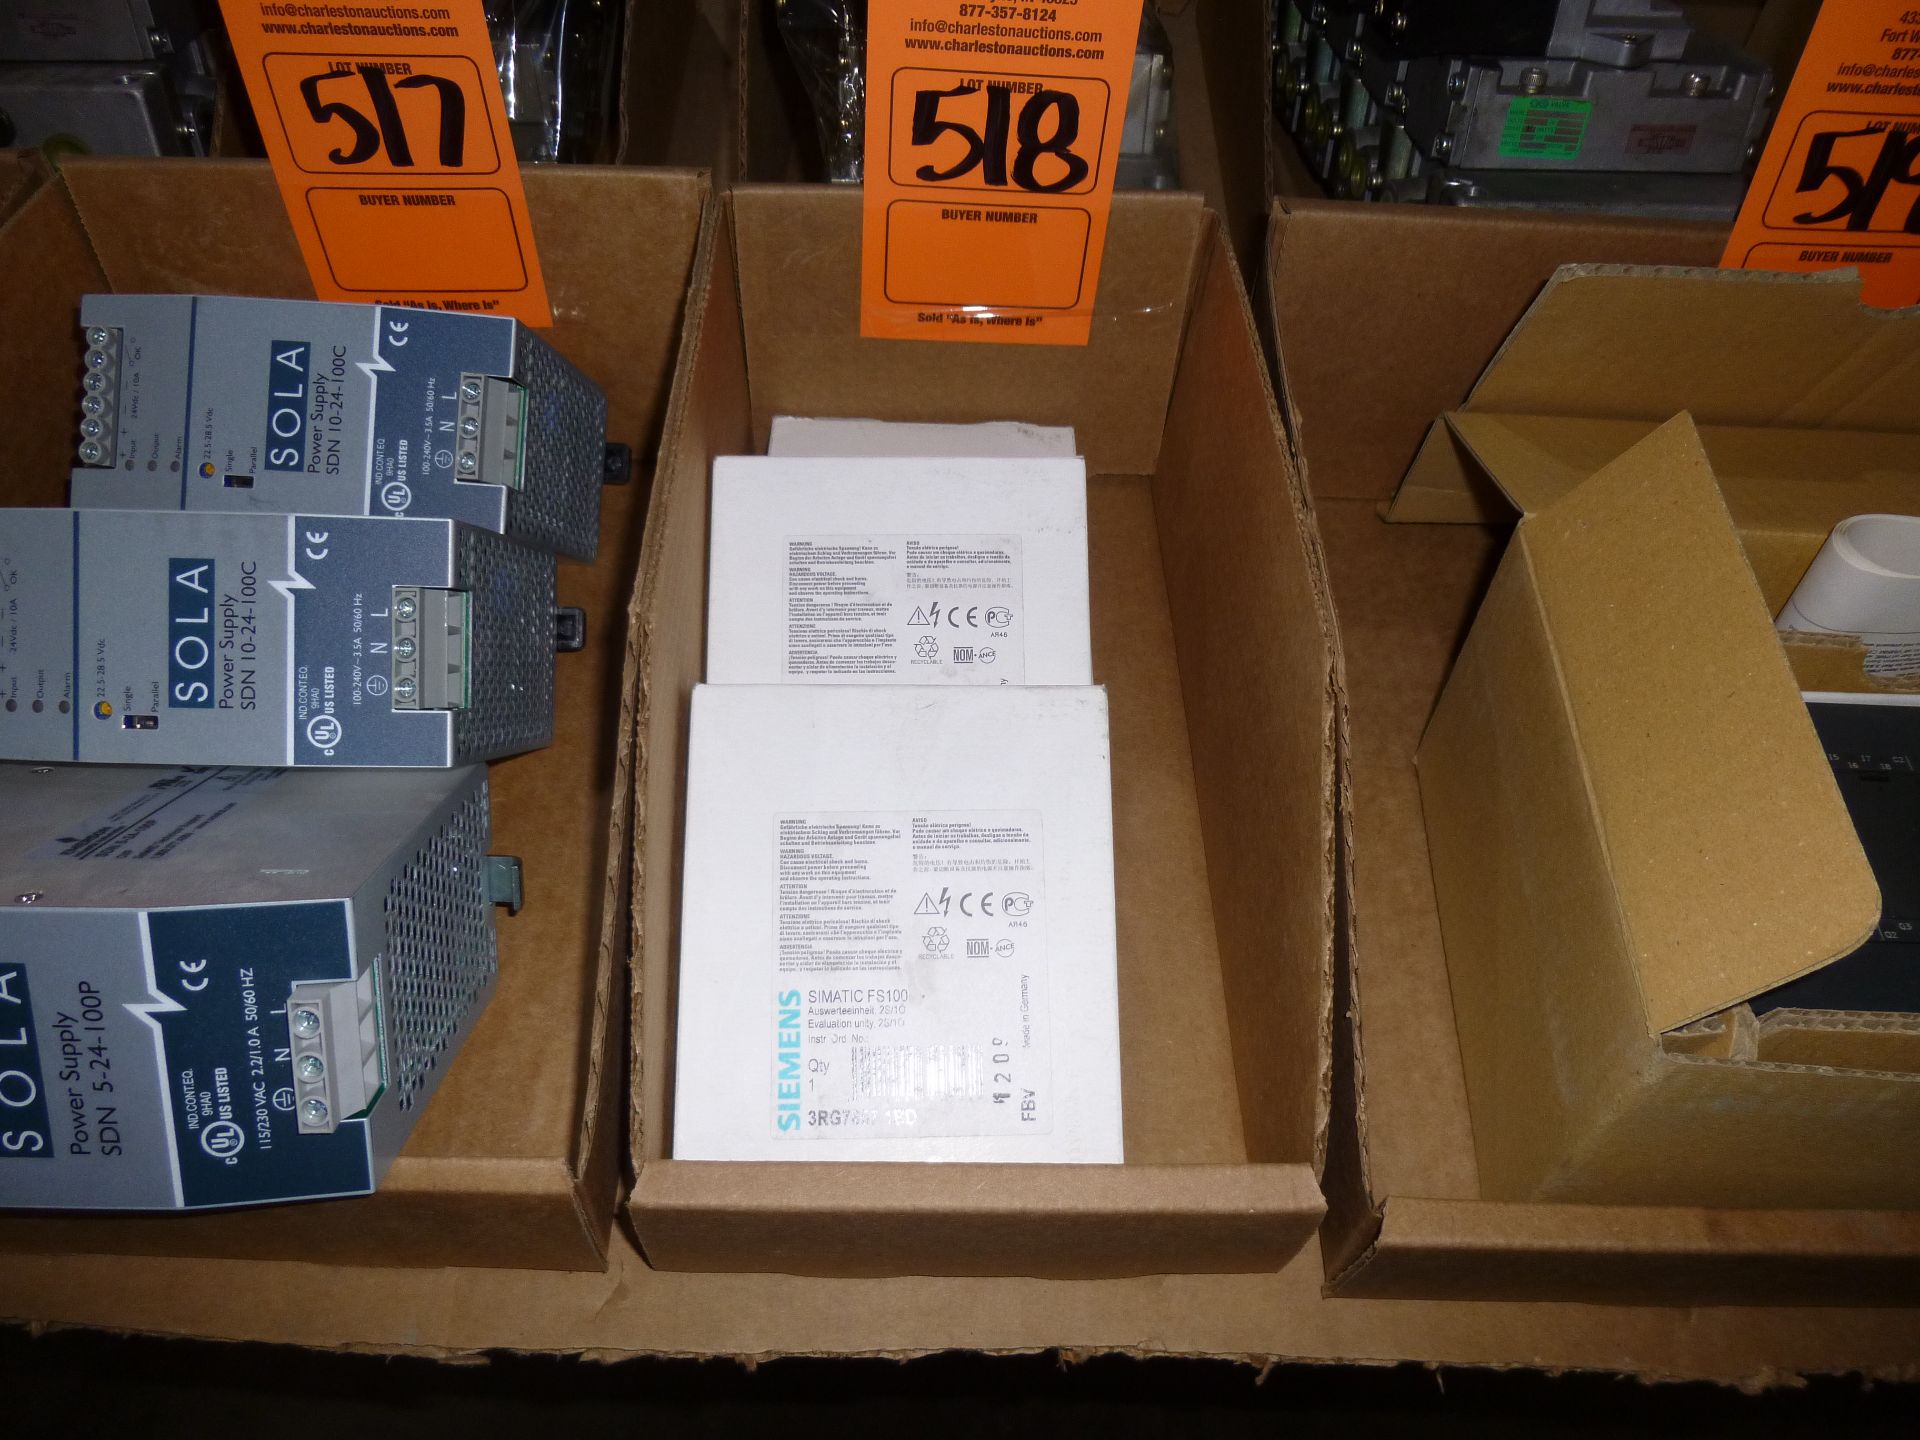 Qty 3 Siemens Simatic FS100, model 3RG7857-1BD, new in boxes, as always with Brolyn LLC auctions,